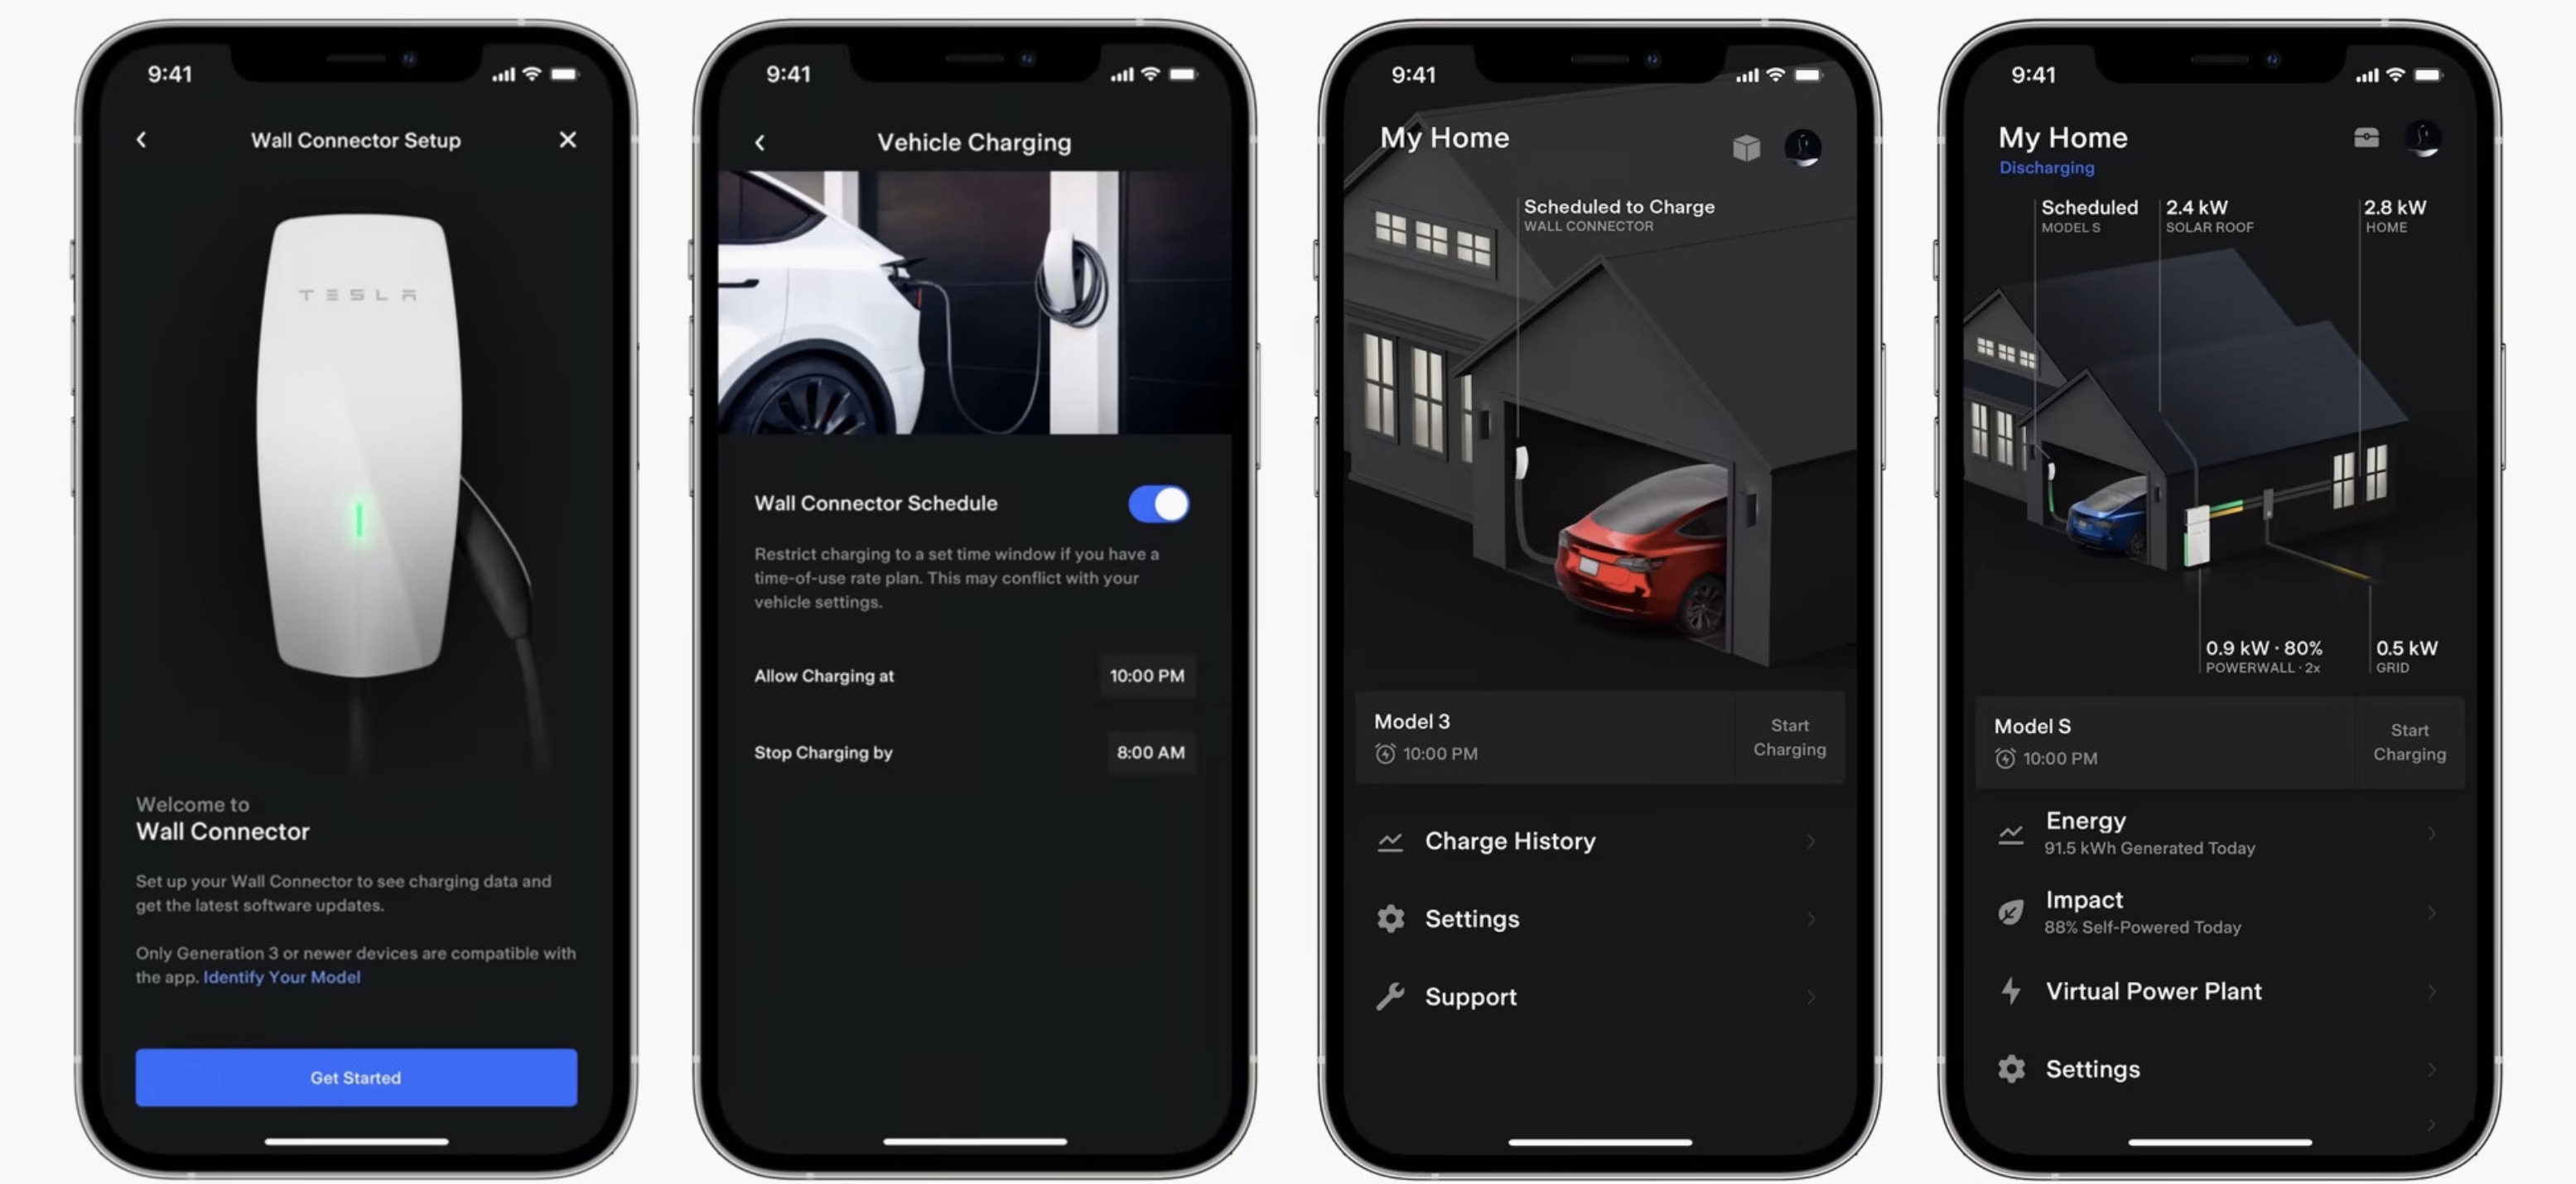 Tesla shows off mobile app Wall Connector controls